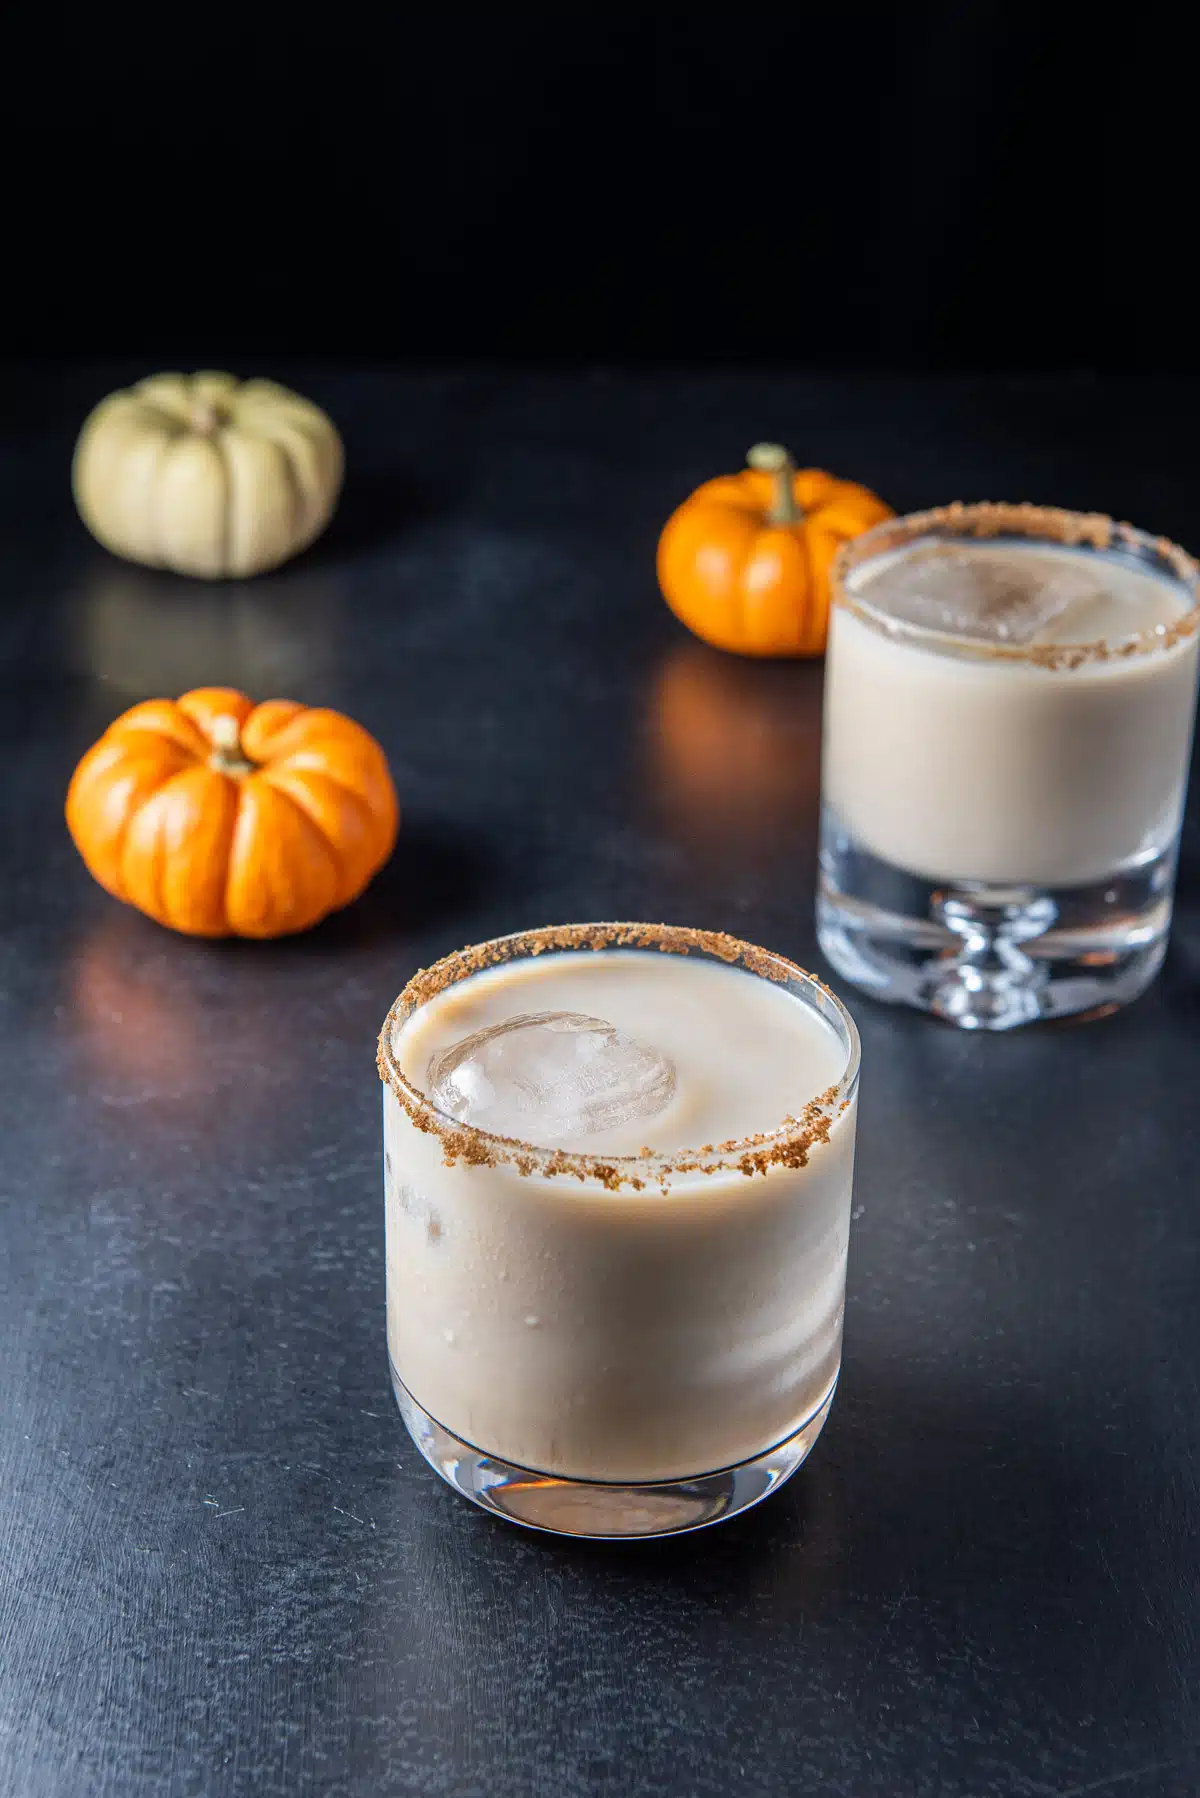 Creamy white Russian in the wider glass in front of the bubble glass with small pumpkins